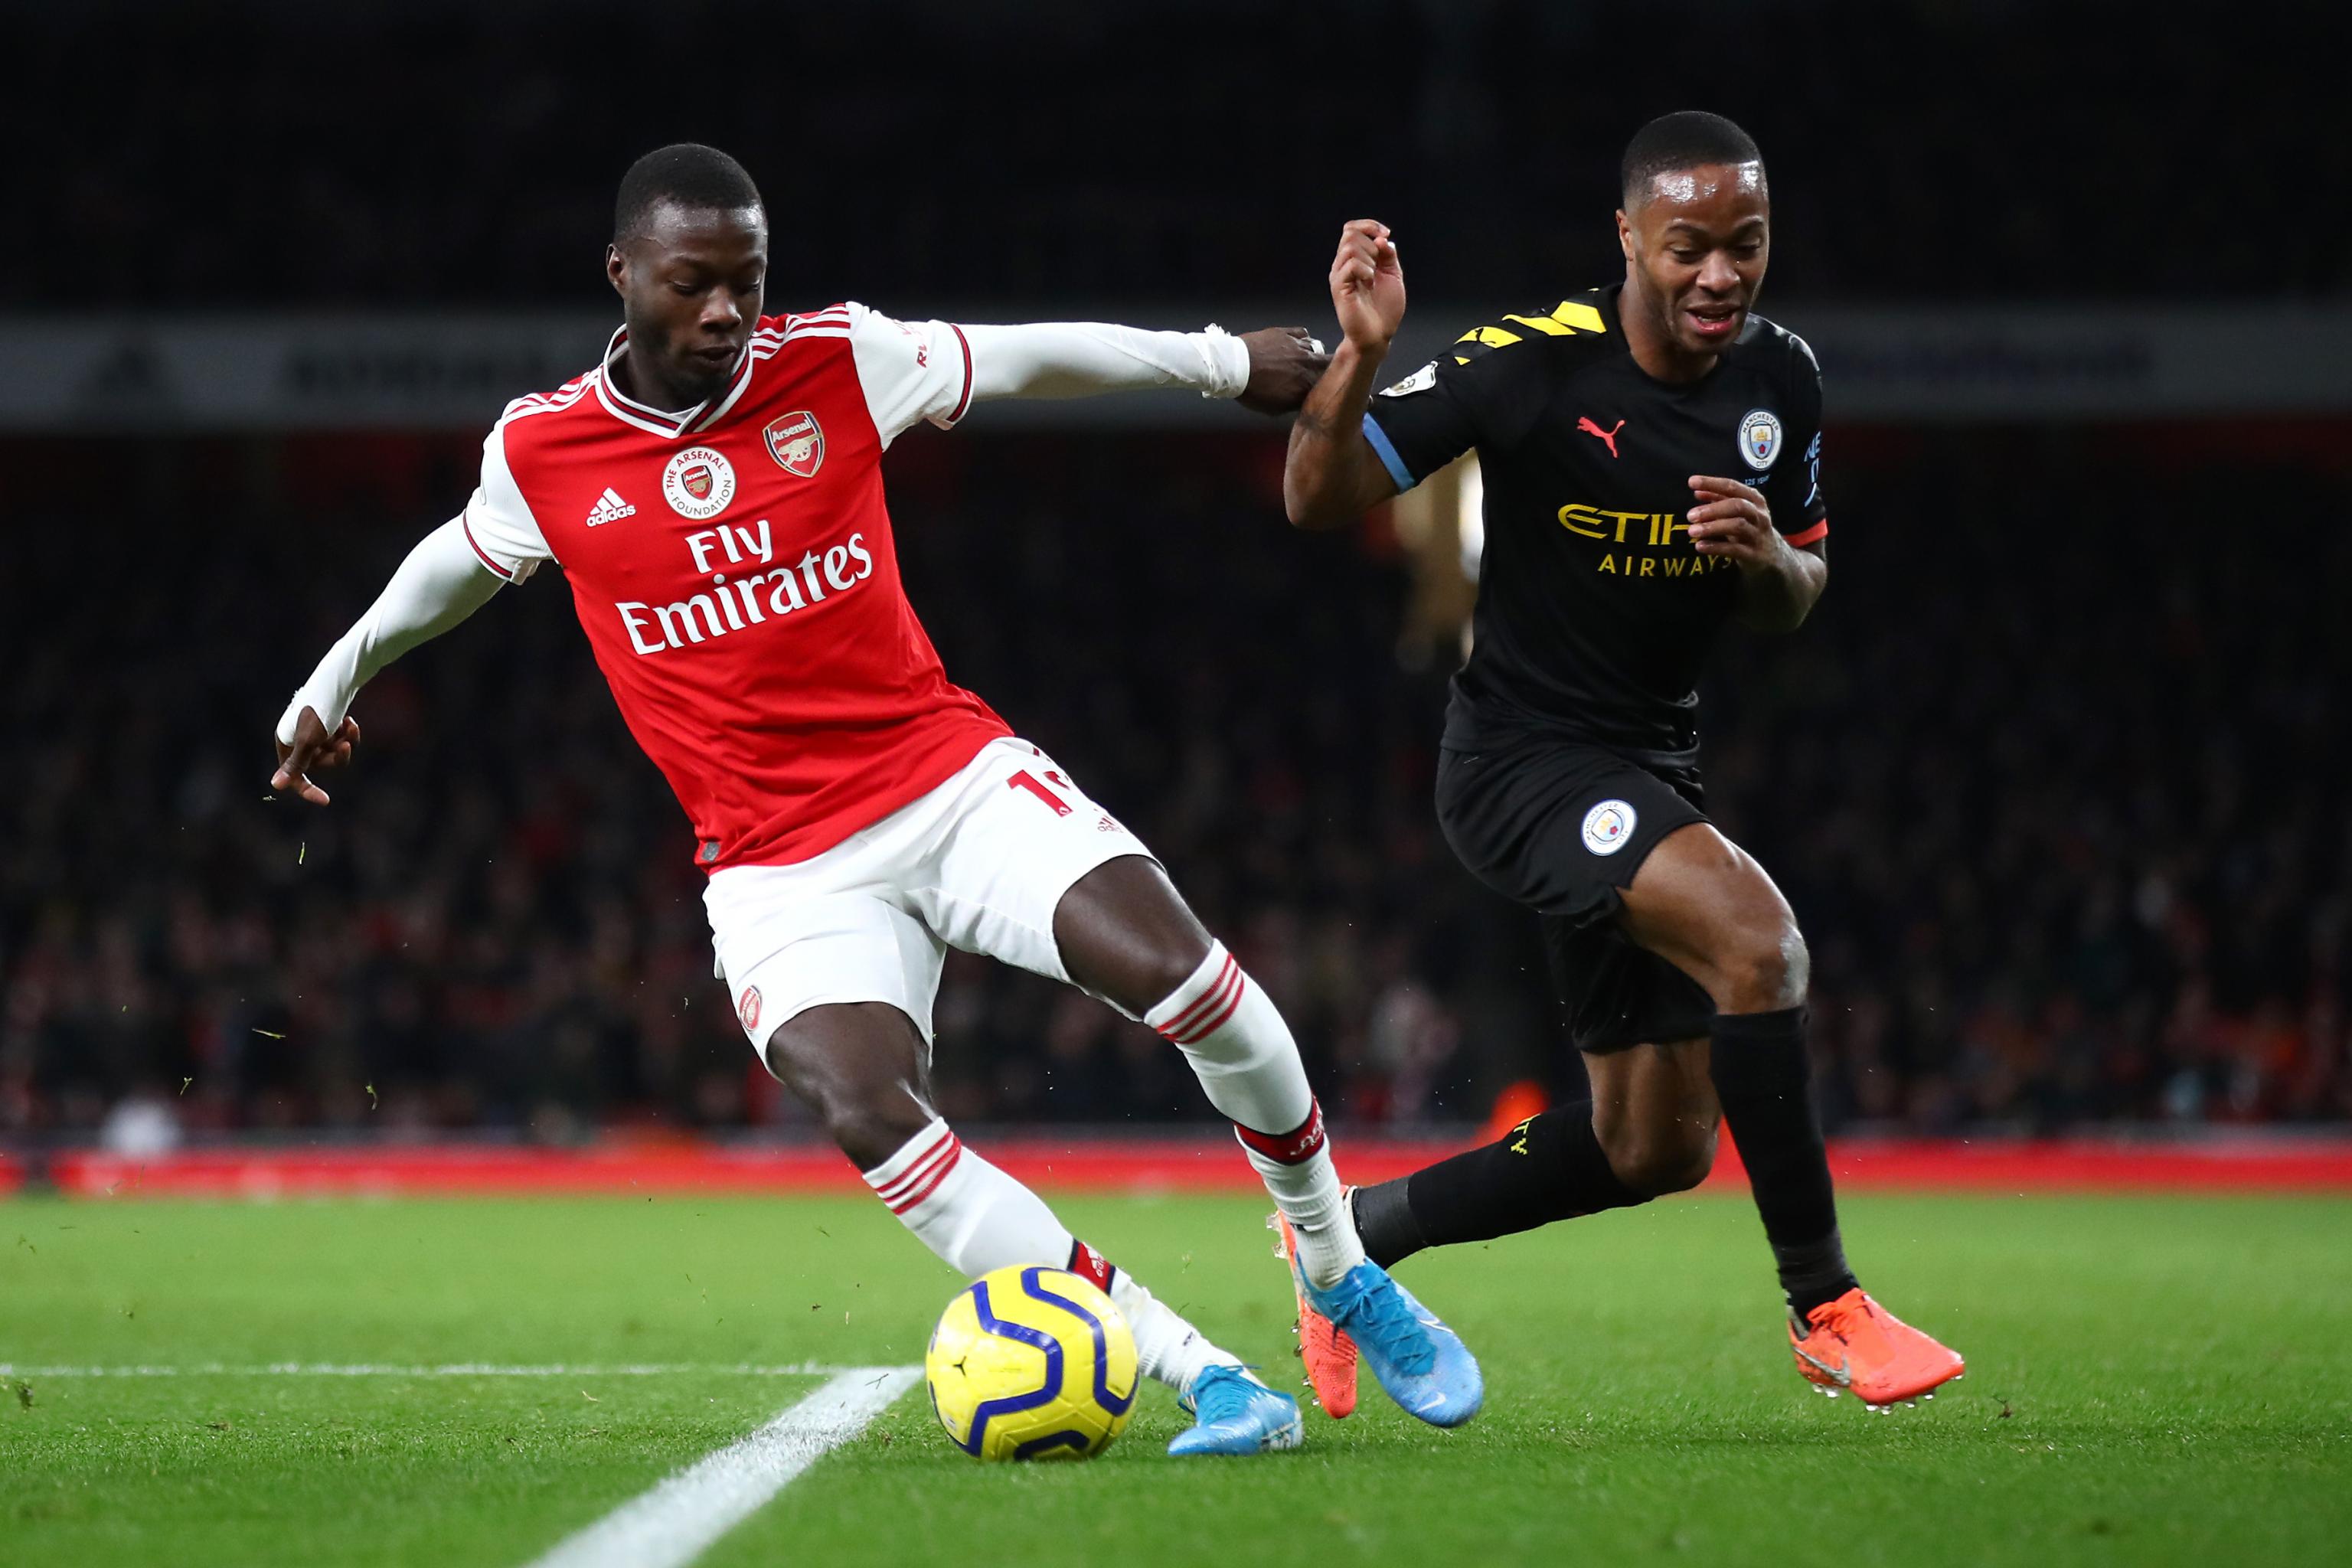 Manchester City Vs Arsenal Set For March 11 After Postponement For Carabao Cup Bleacher Report Latest News Videos And Highlights